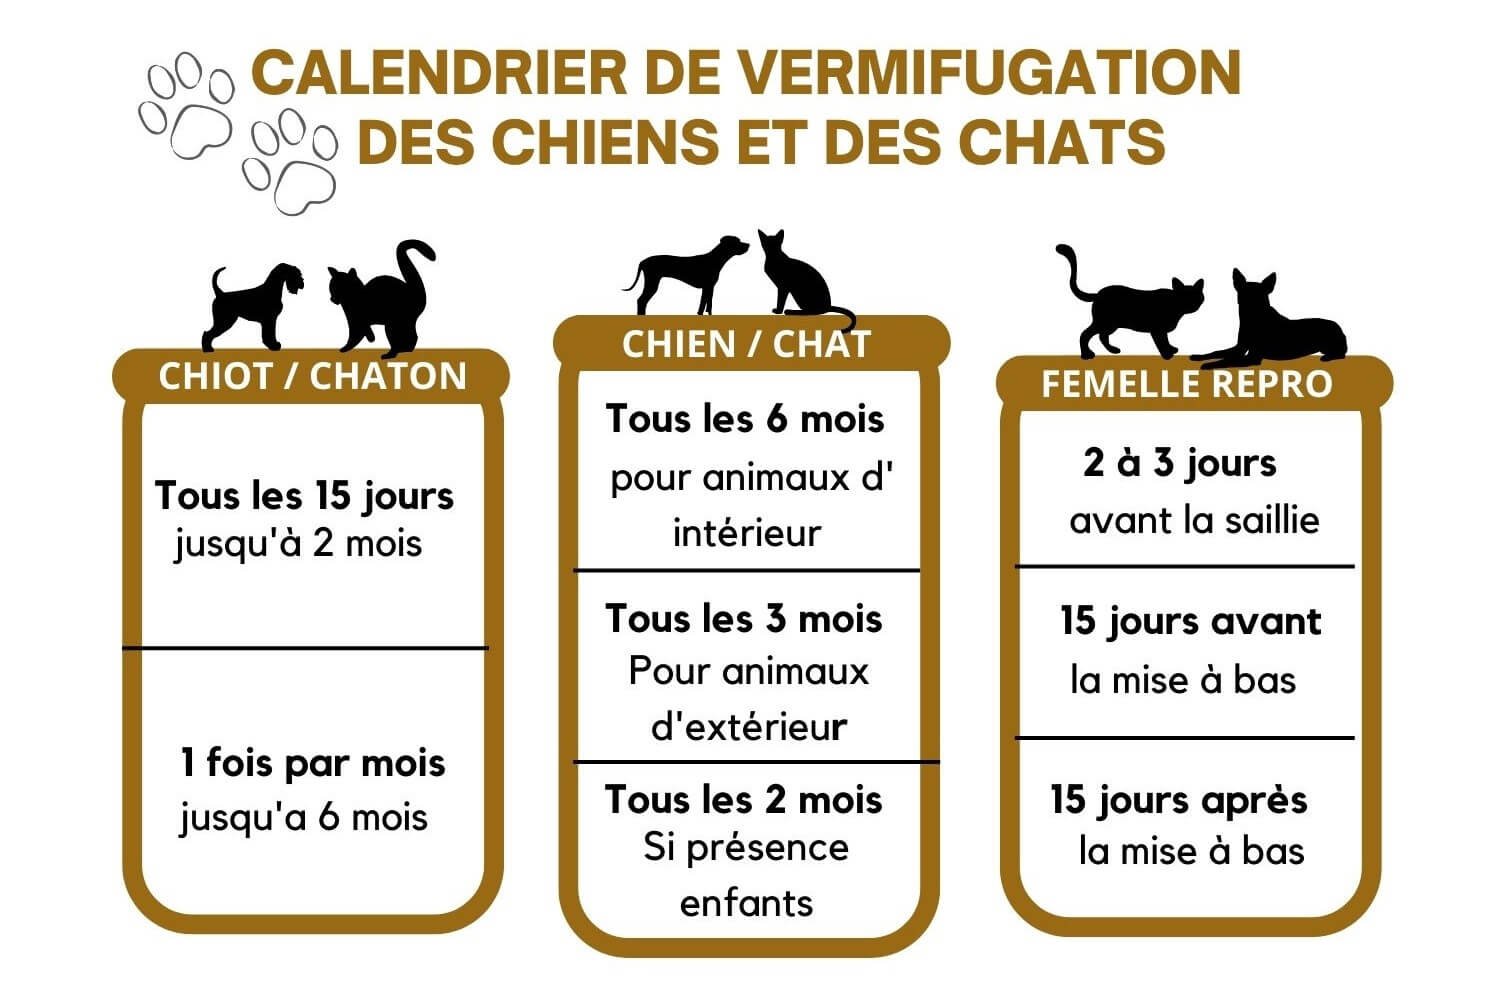 calendrier-vermifugation-chiens-chats